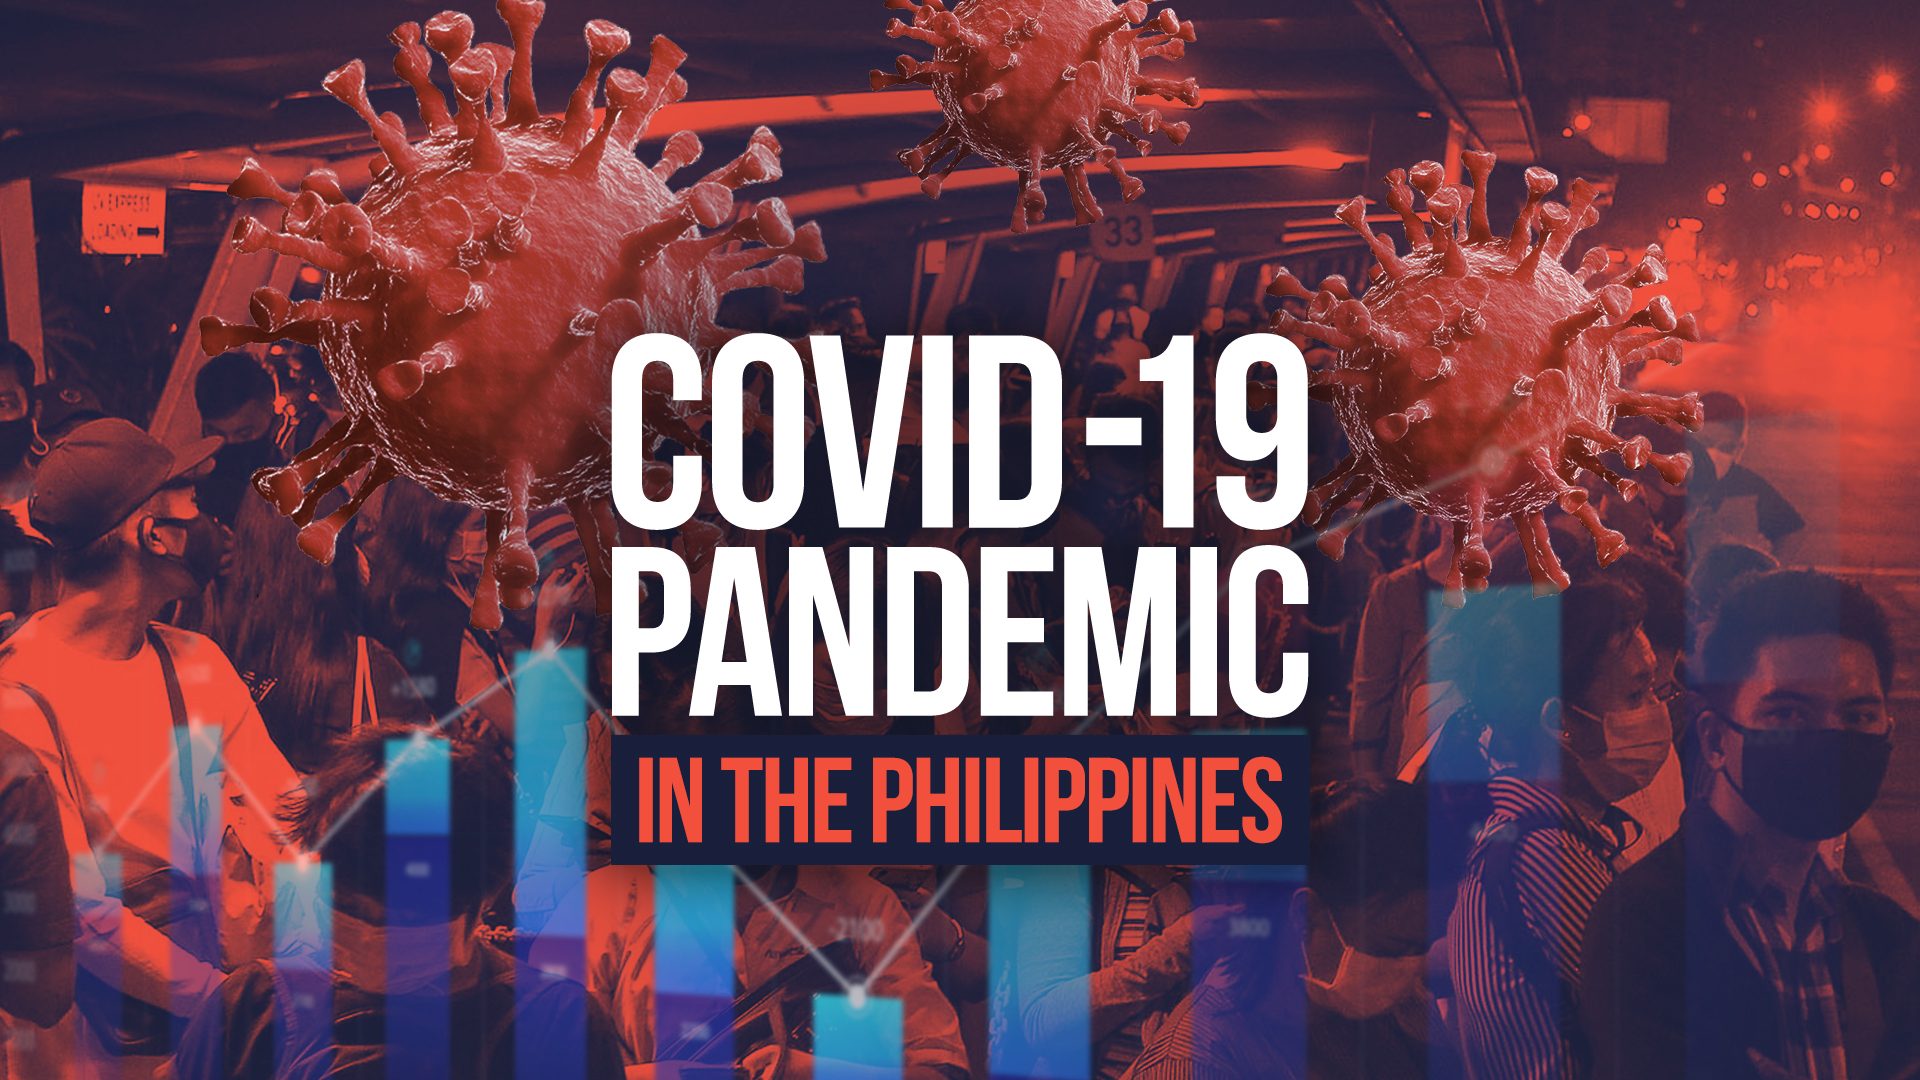 COVID-19 pandemic: Latest situation in the Philippines – May 2022